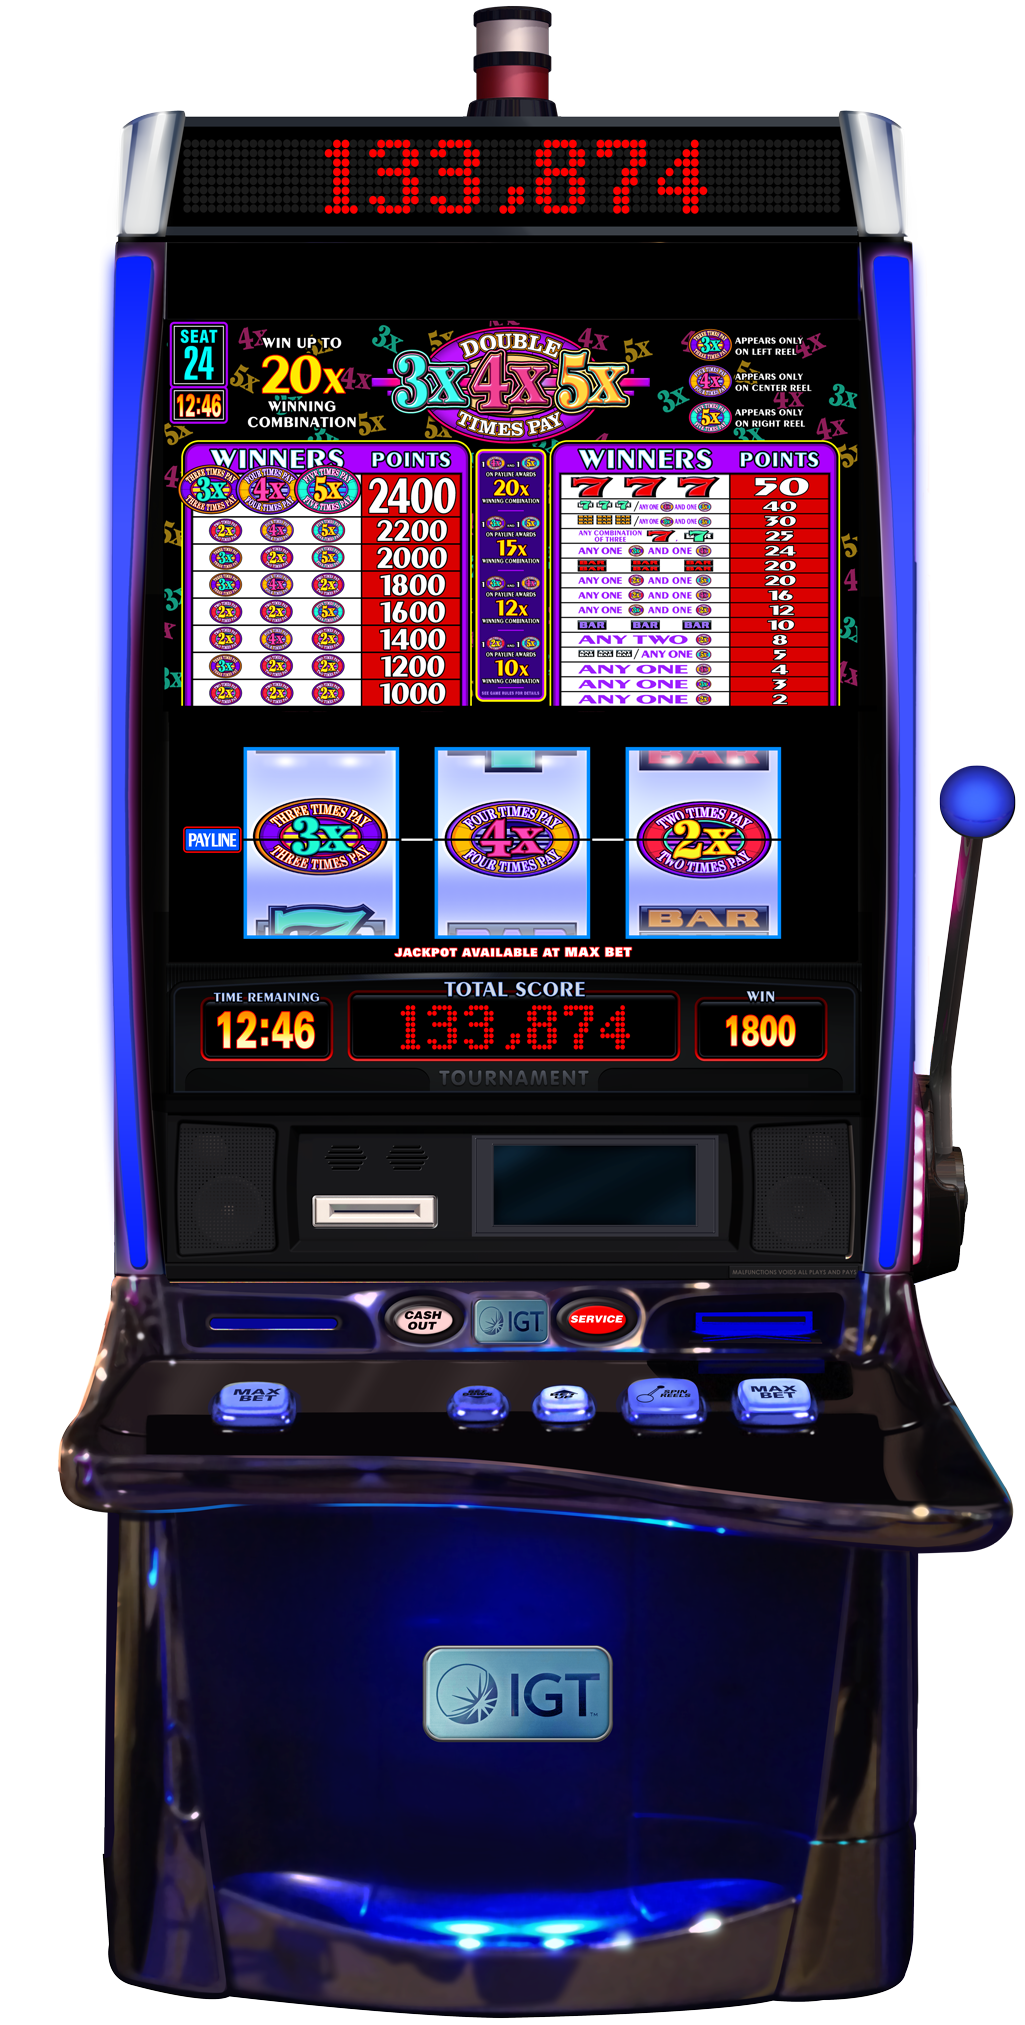 IGT's s3000 stepper slot machine featuring IGT's Spin Derby Tournament slot game. This refreshed stepper tournament game promises to excite and engage players on any casino floor.